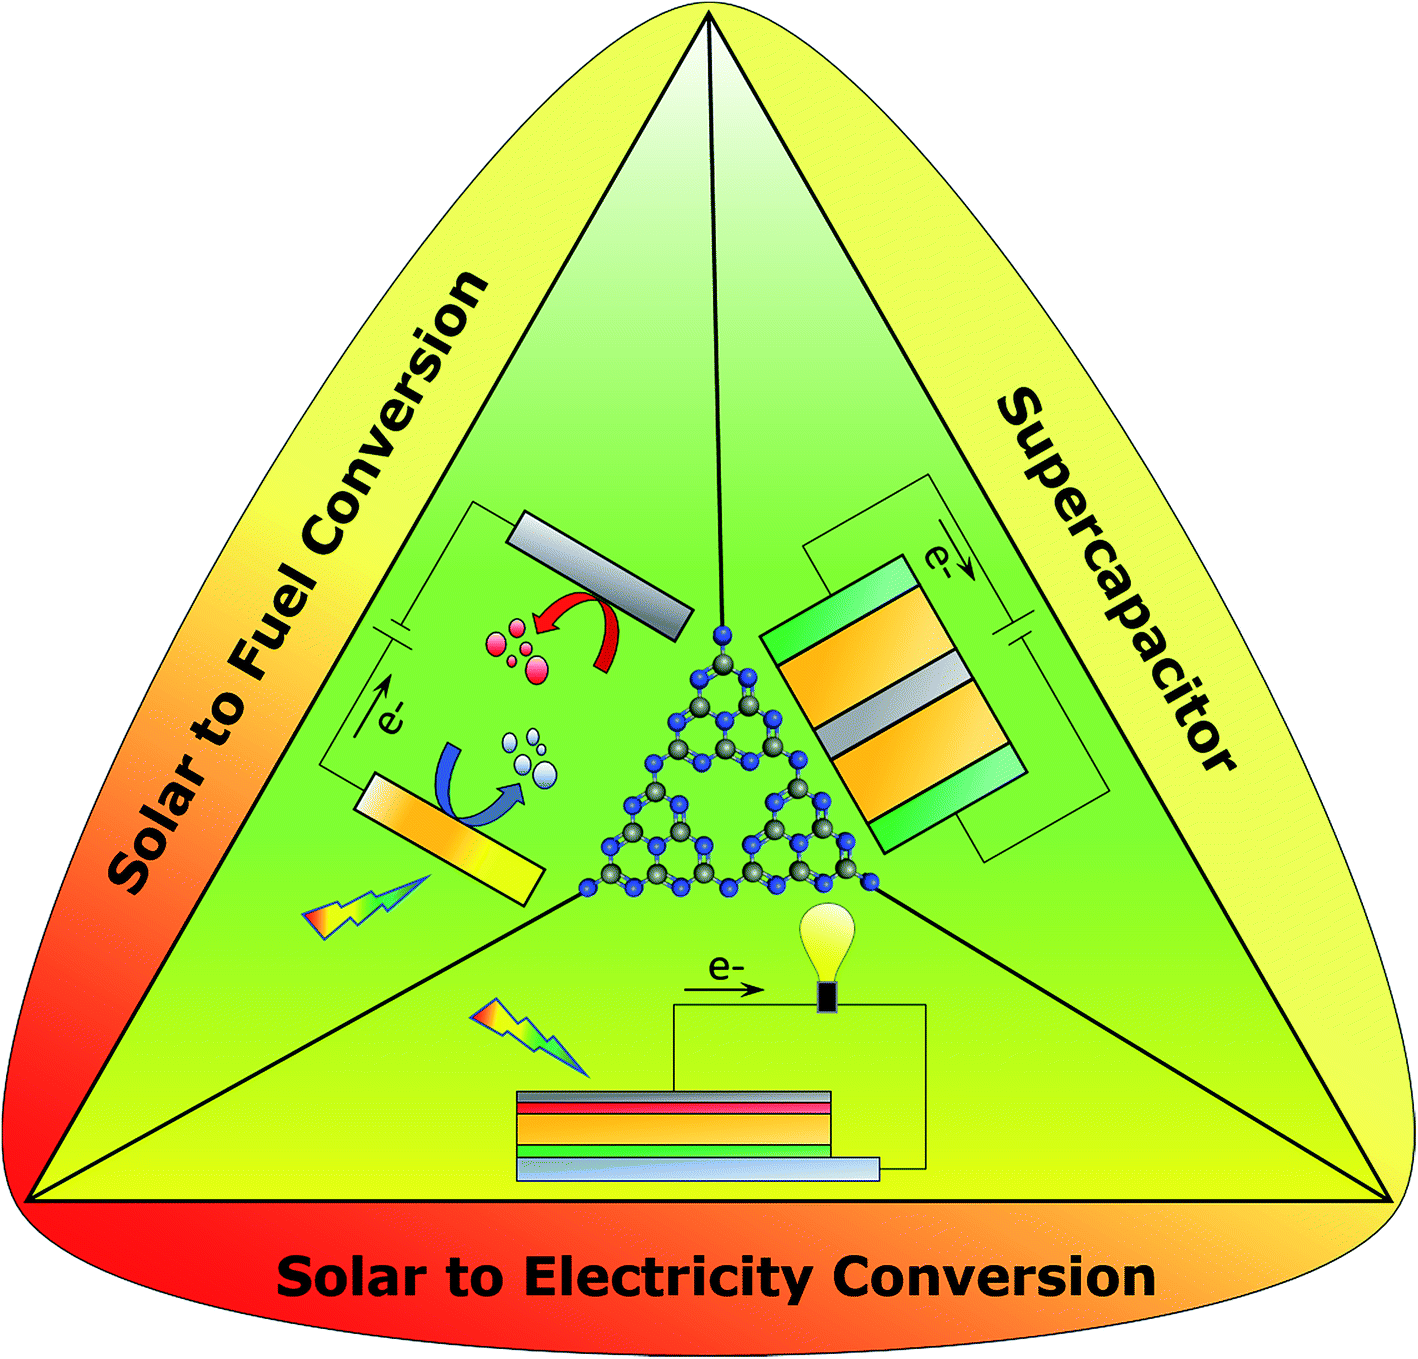 Graphitic Carbon Nitride G C3n4 Electrodes For Energy Conversion And Storage A Review On Photoelectrochemical Water Splitting Solar Cells And Supercapacitors Journal Of Materials Chemistry A Rsc Publishing